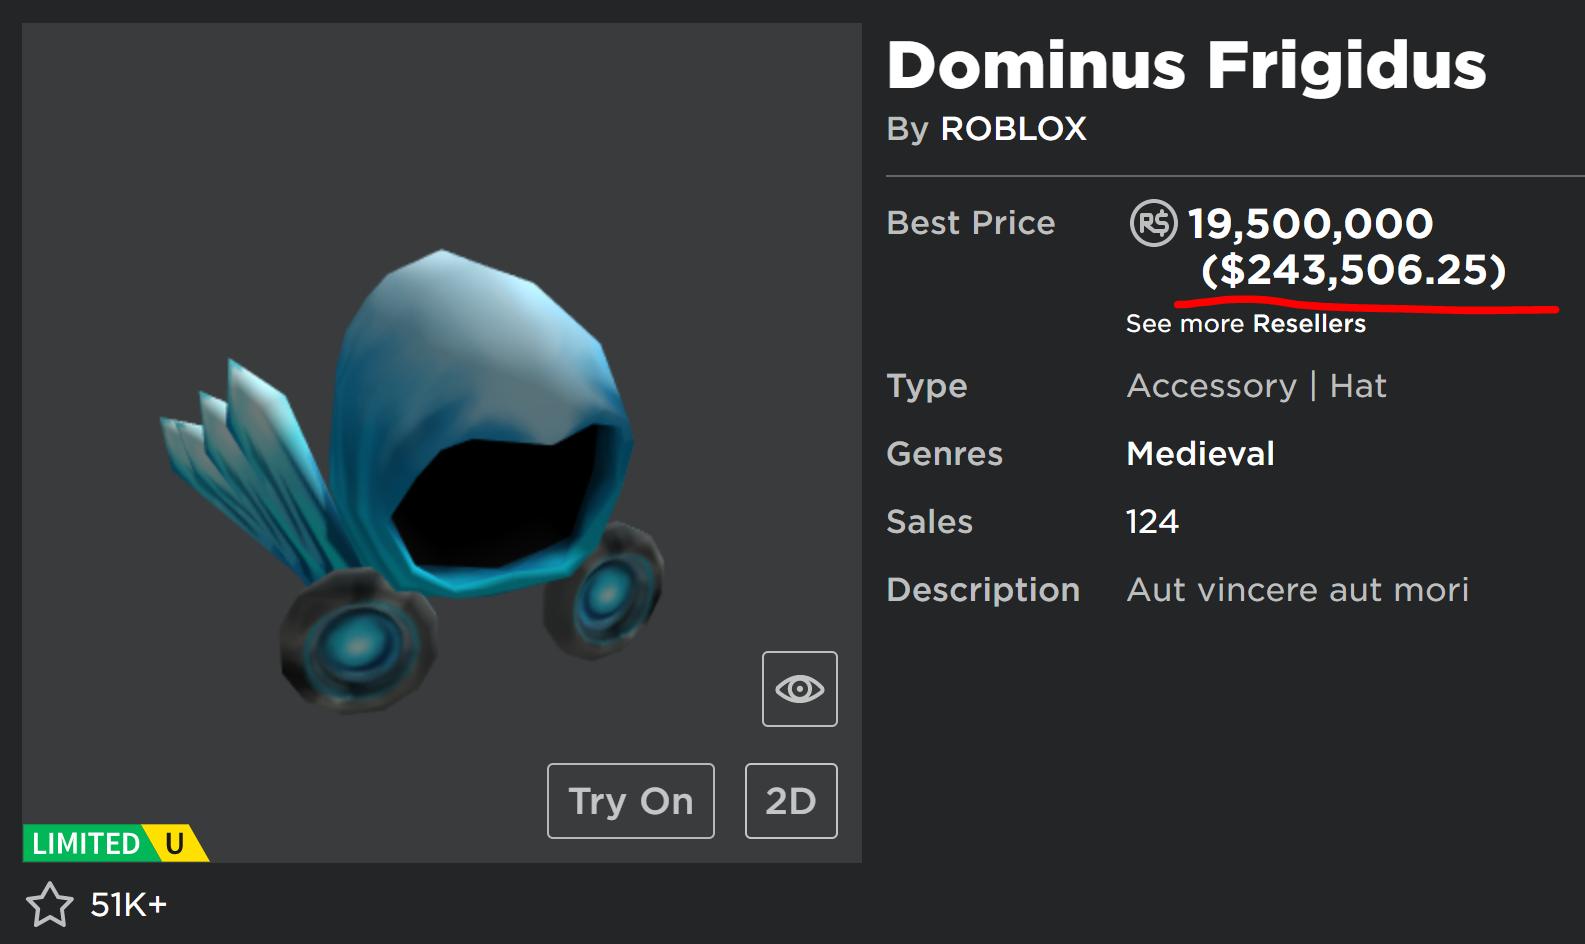 KreekCraft on X: This dominus is literally more expensive than my